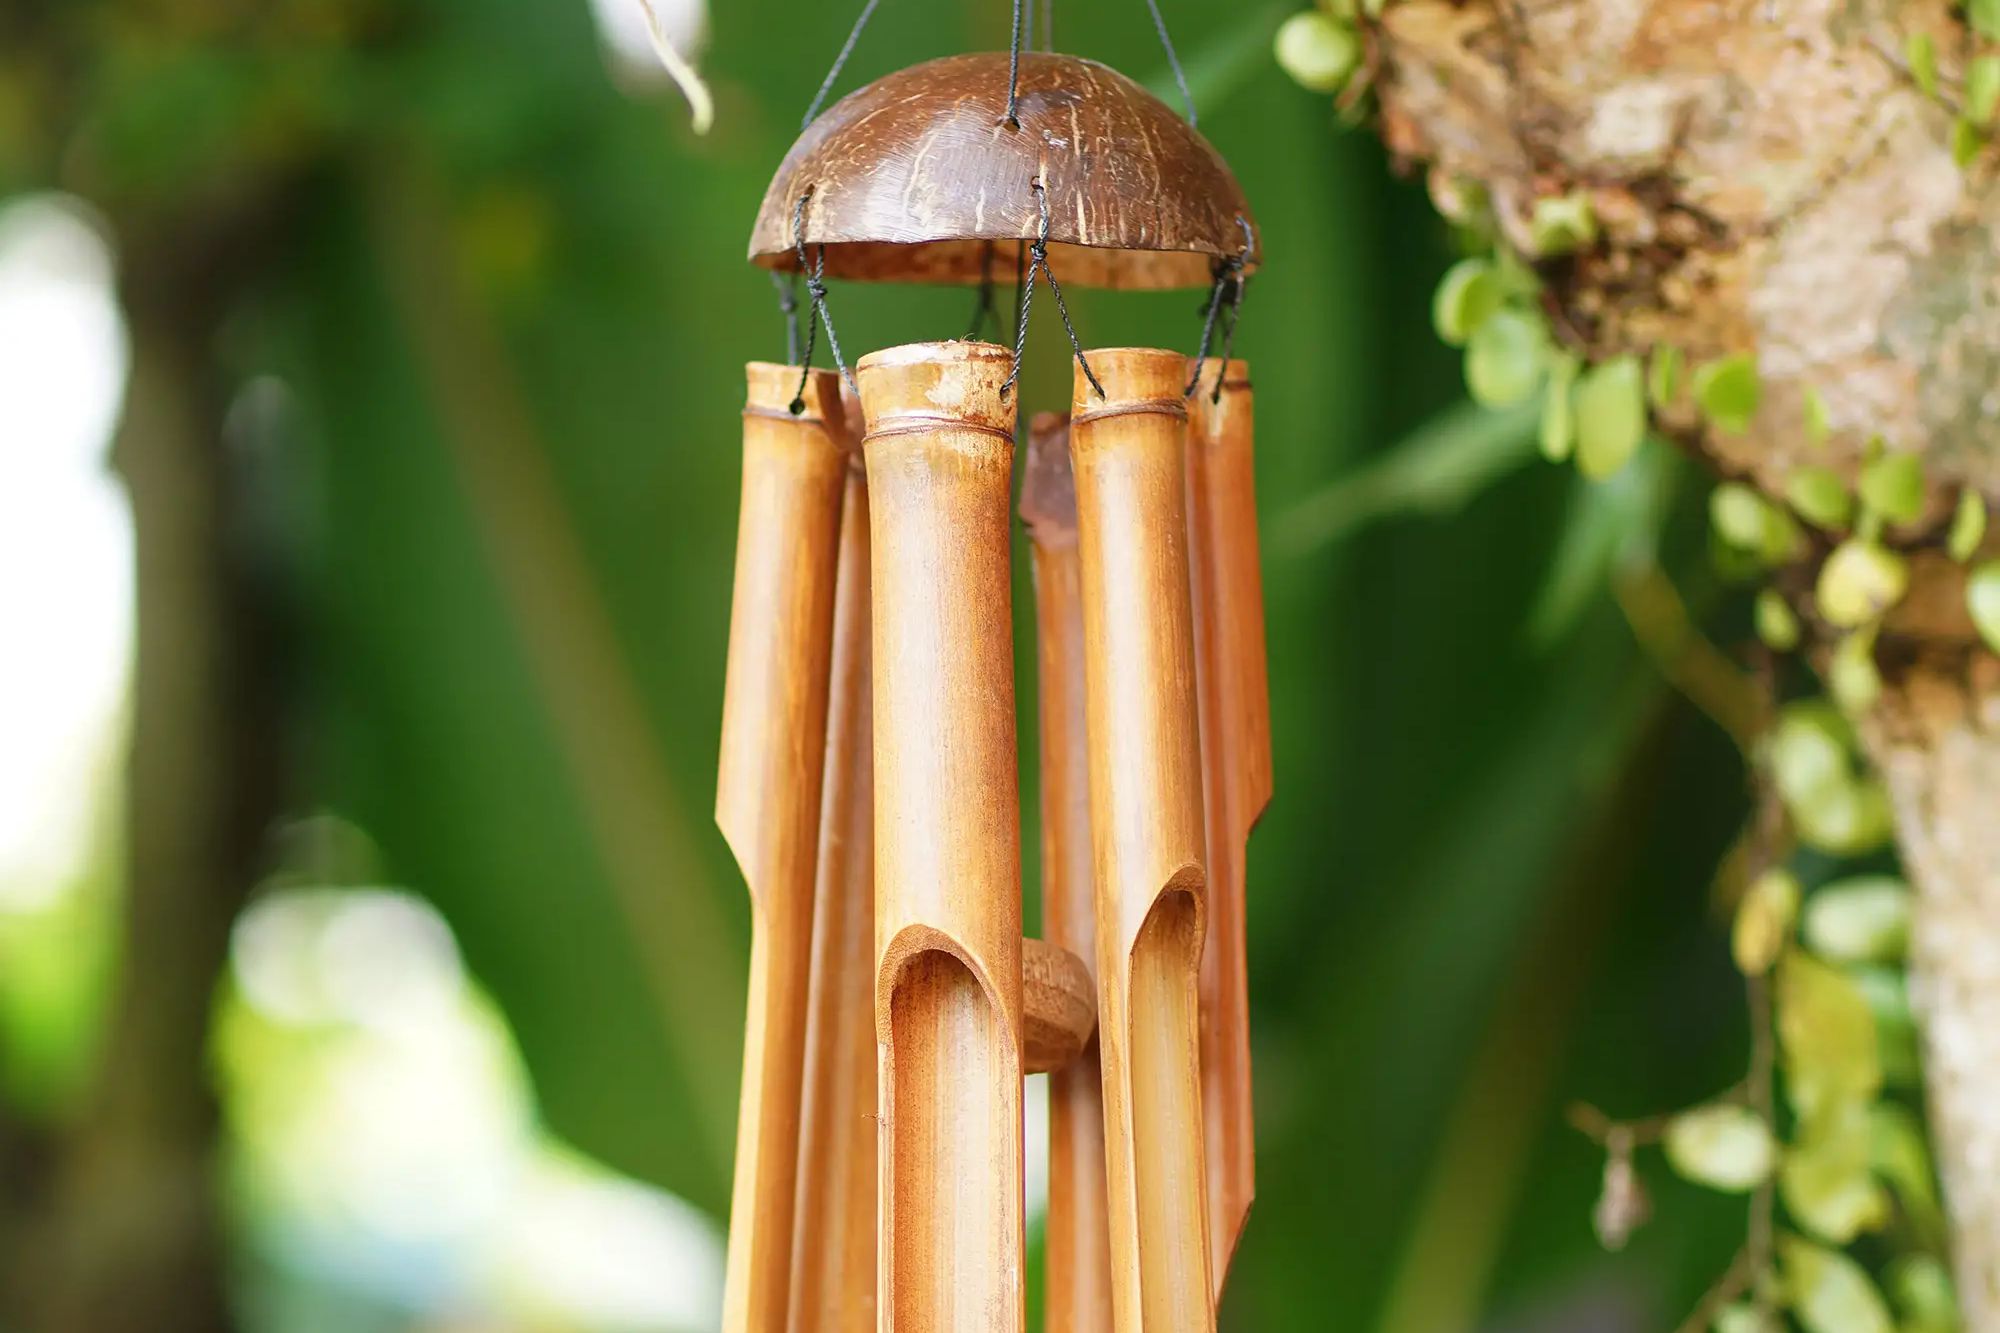 Novica Hand Crafted Bamboo Wind Chime from Bali